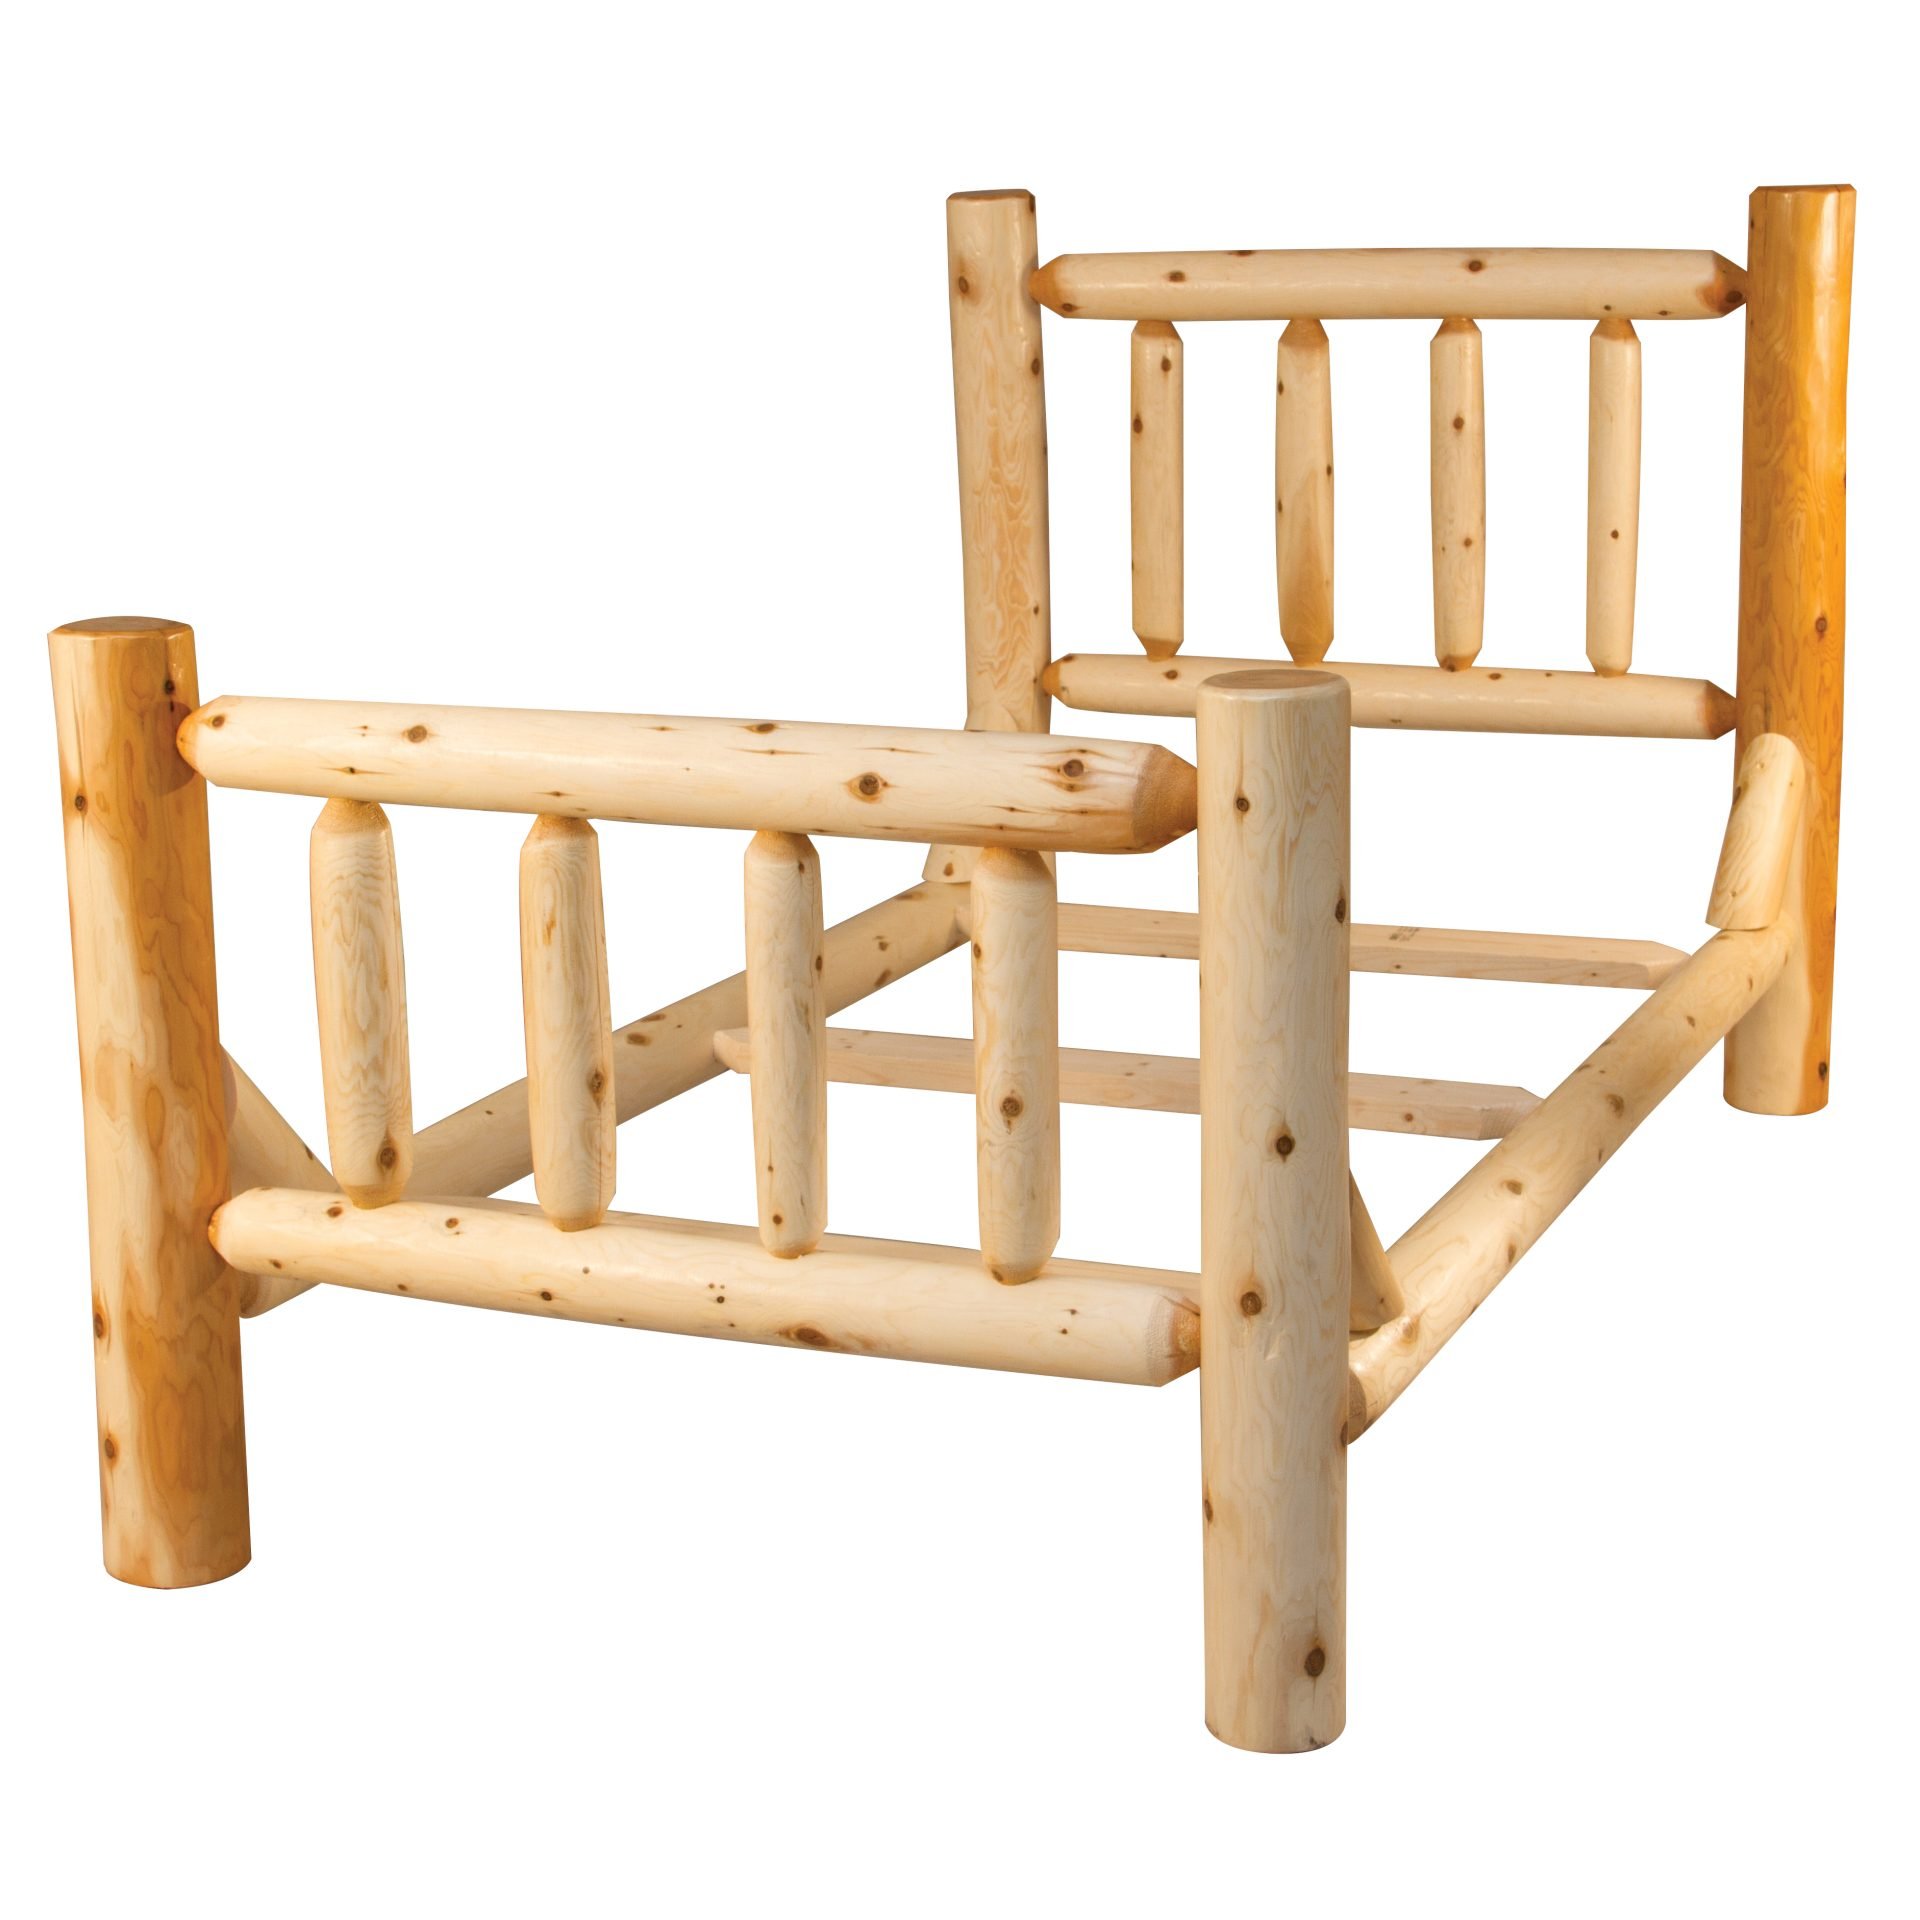 Rustic White Cedar Log Mission Style Bed